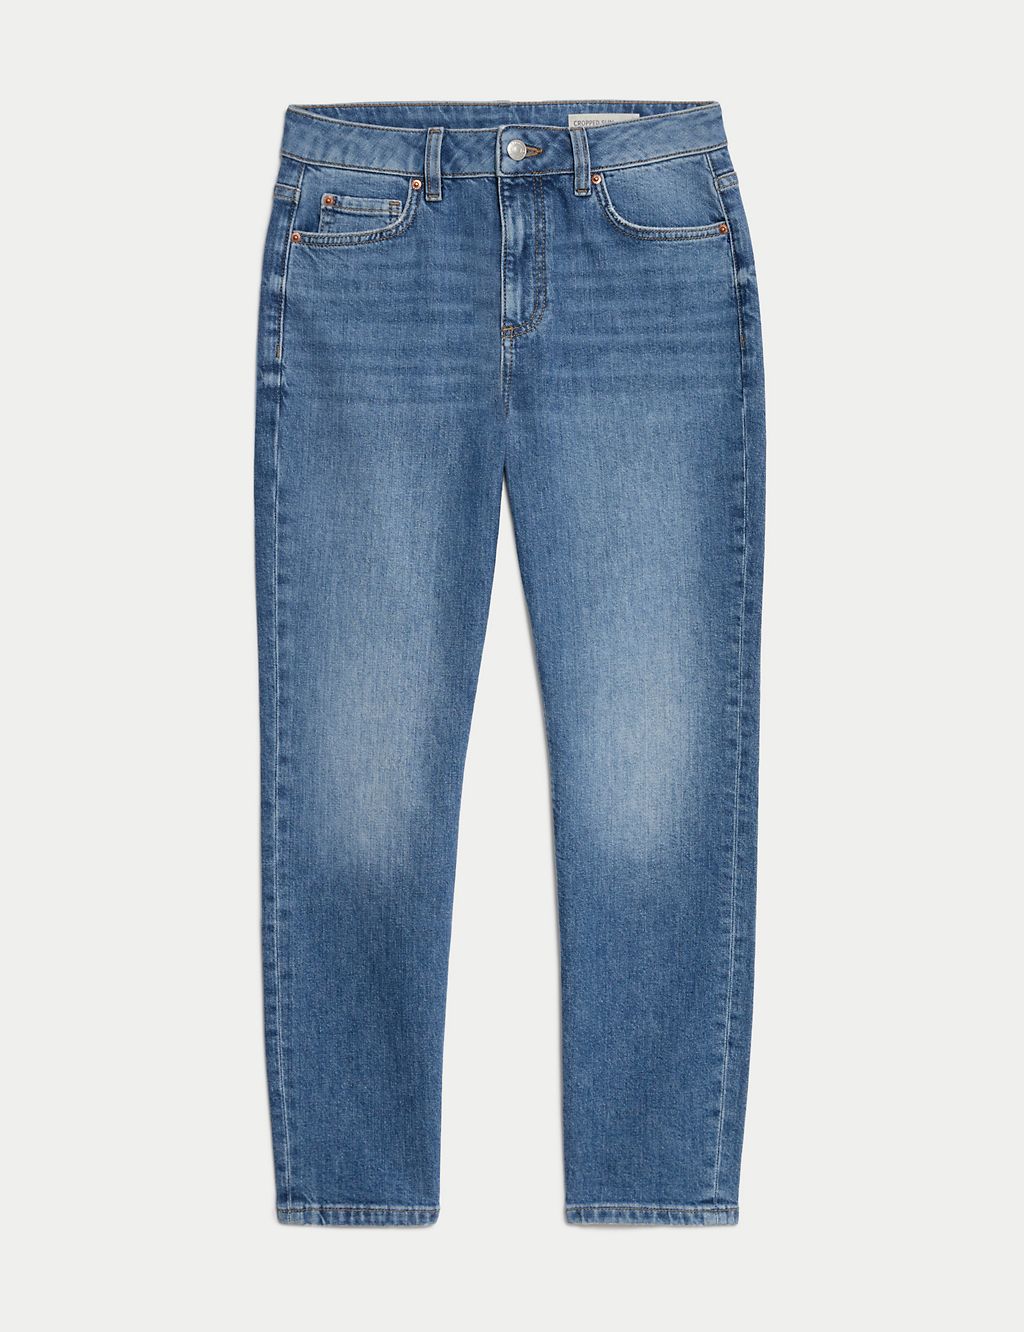 High Waisted Slim Fit Cropped Jeans 1 of 6